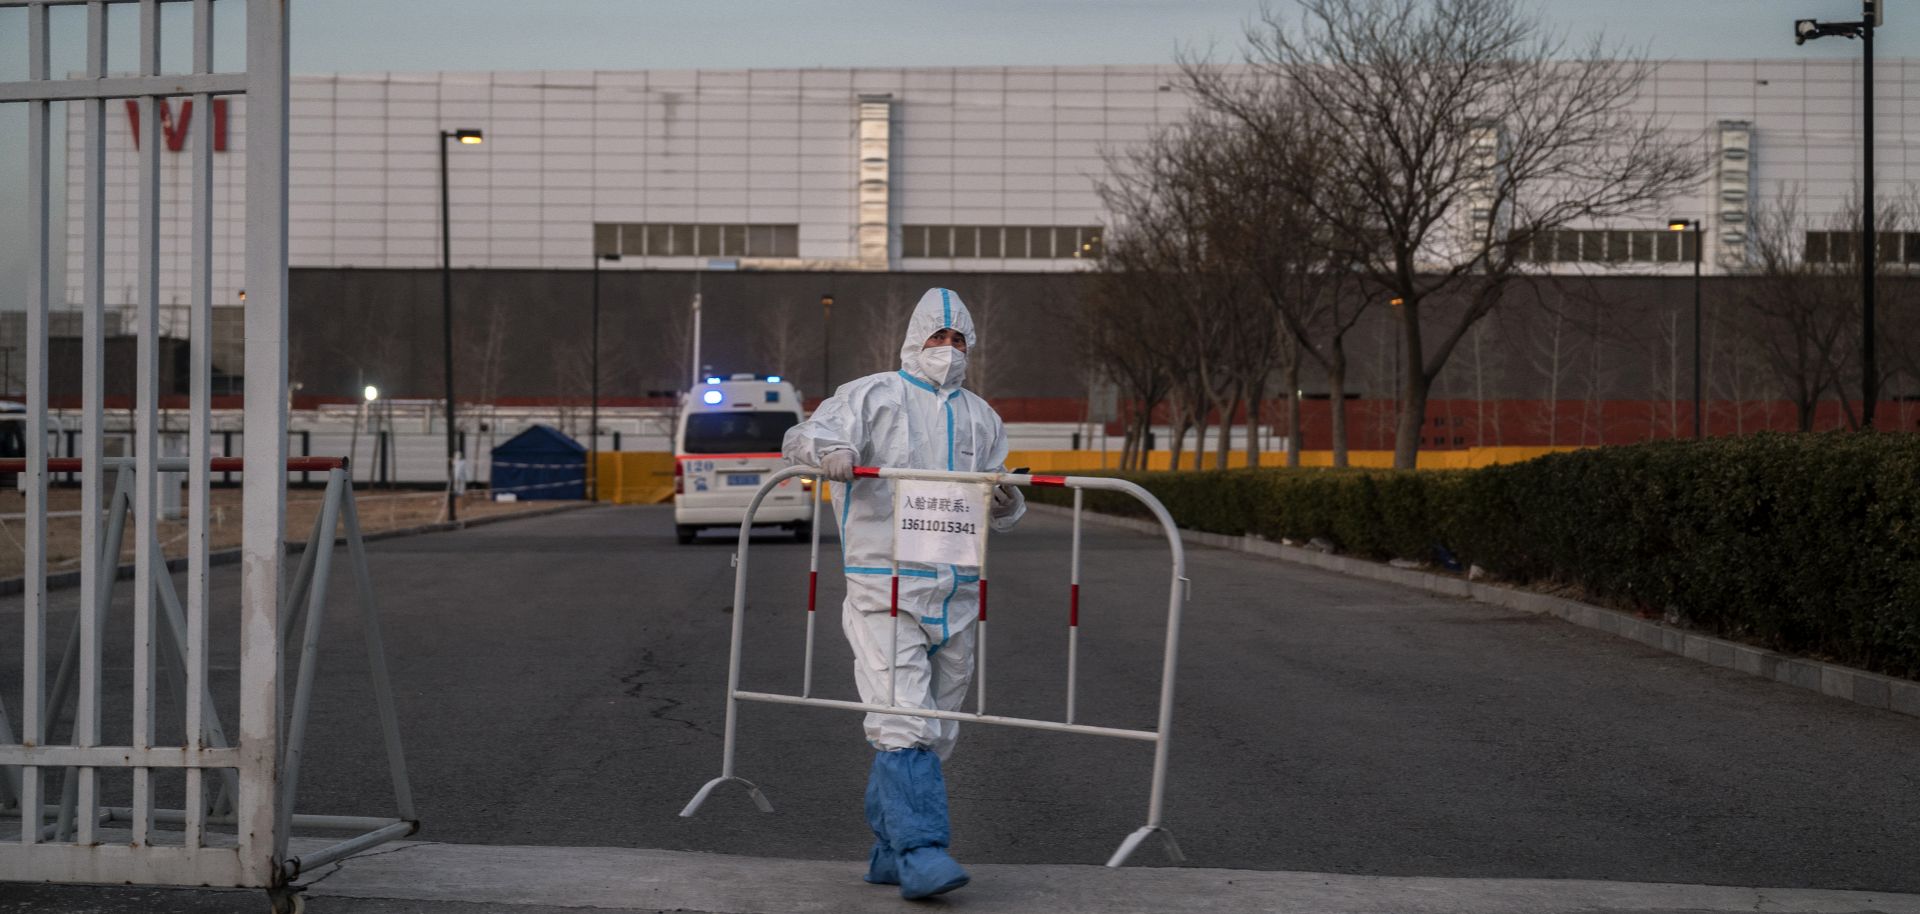 A worker places a barricade on a road after allowing an ambulance to enter a COVID-19 quarantine facility in Beijing, China, on Dec. 7, 2022. 